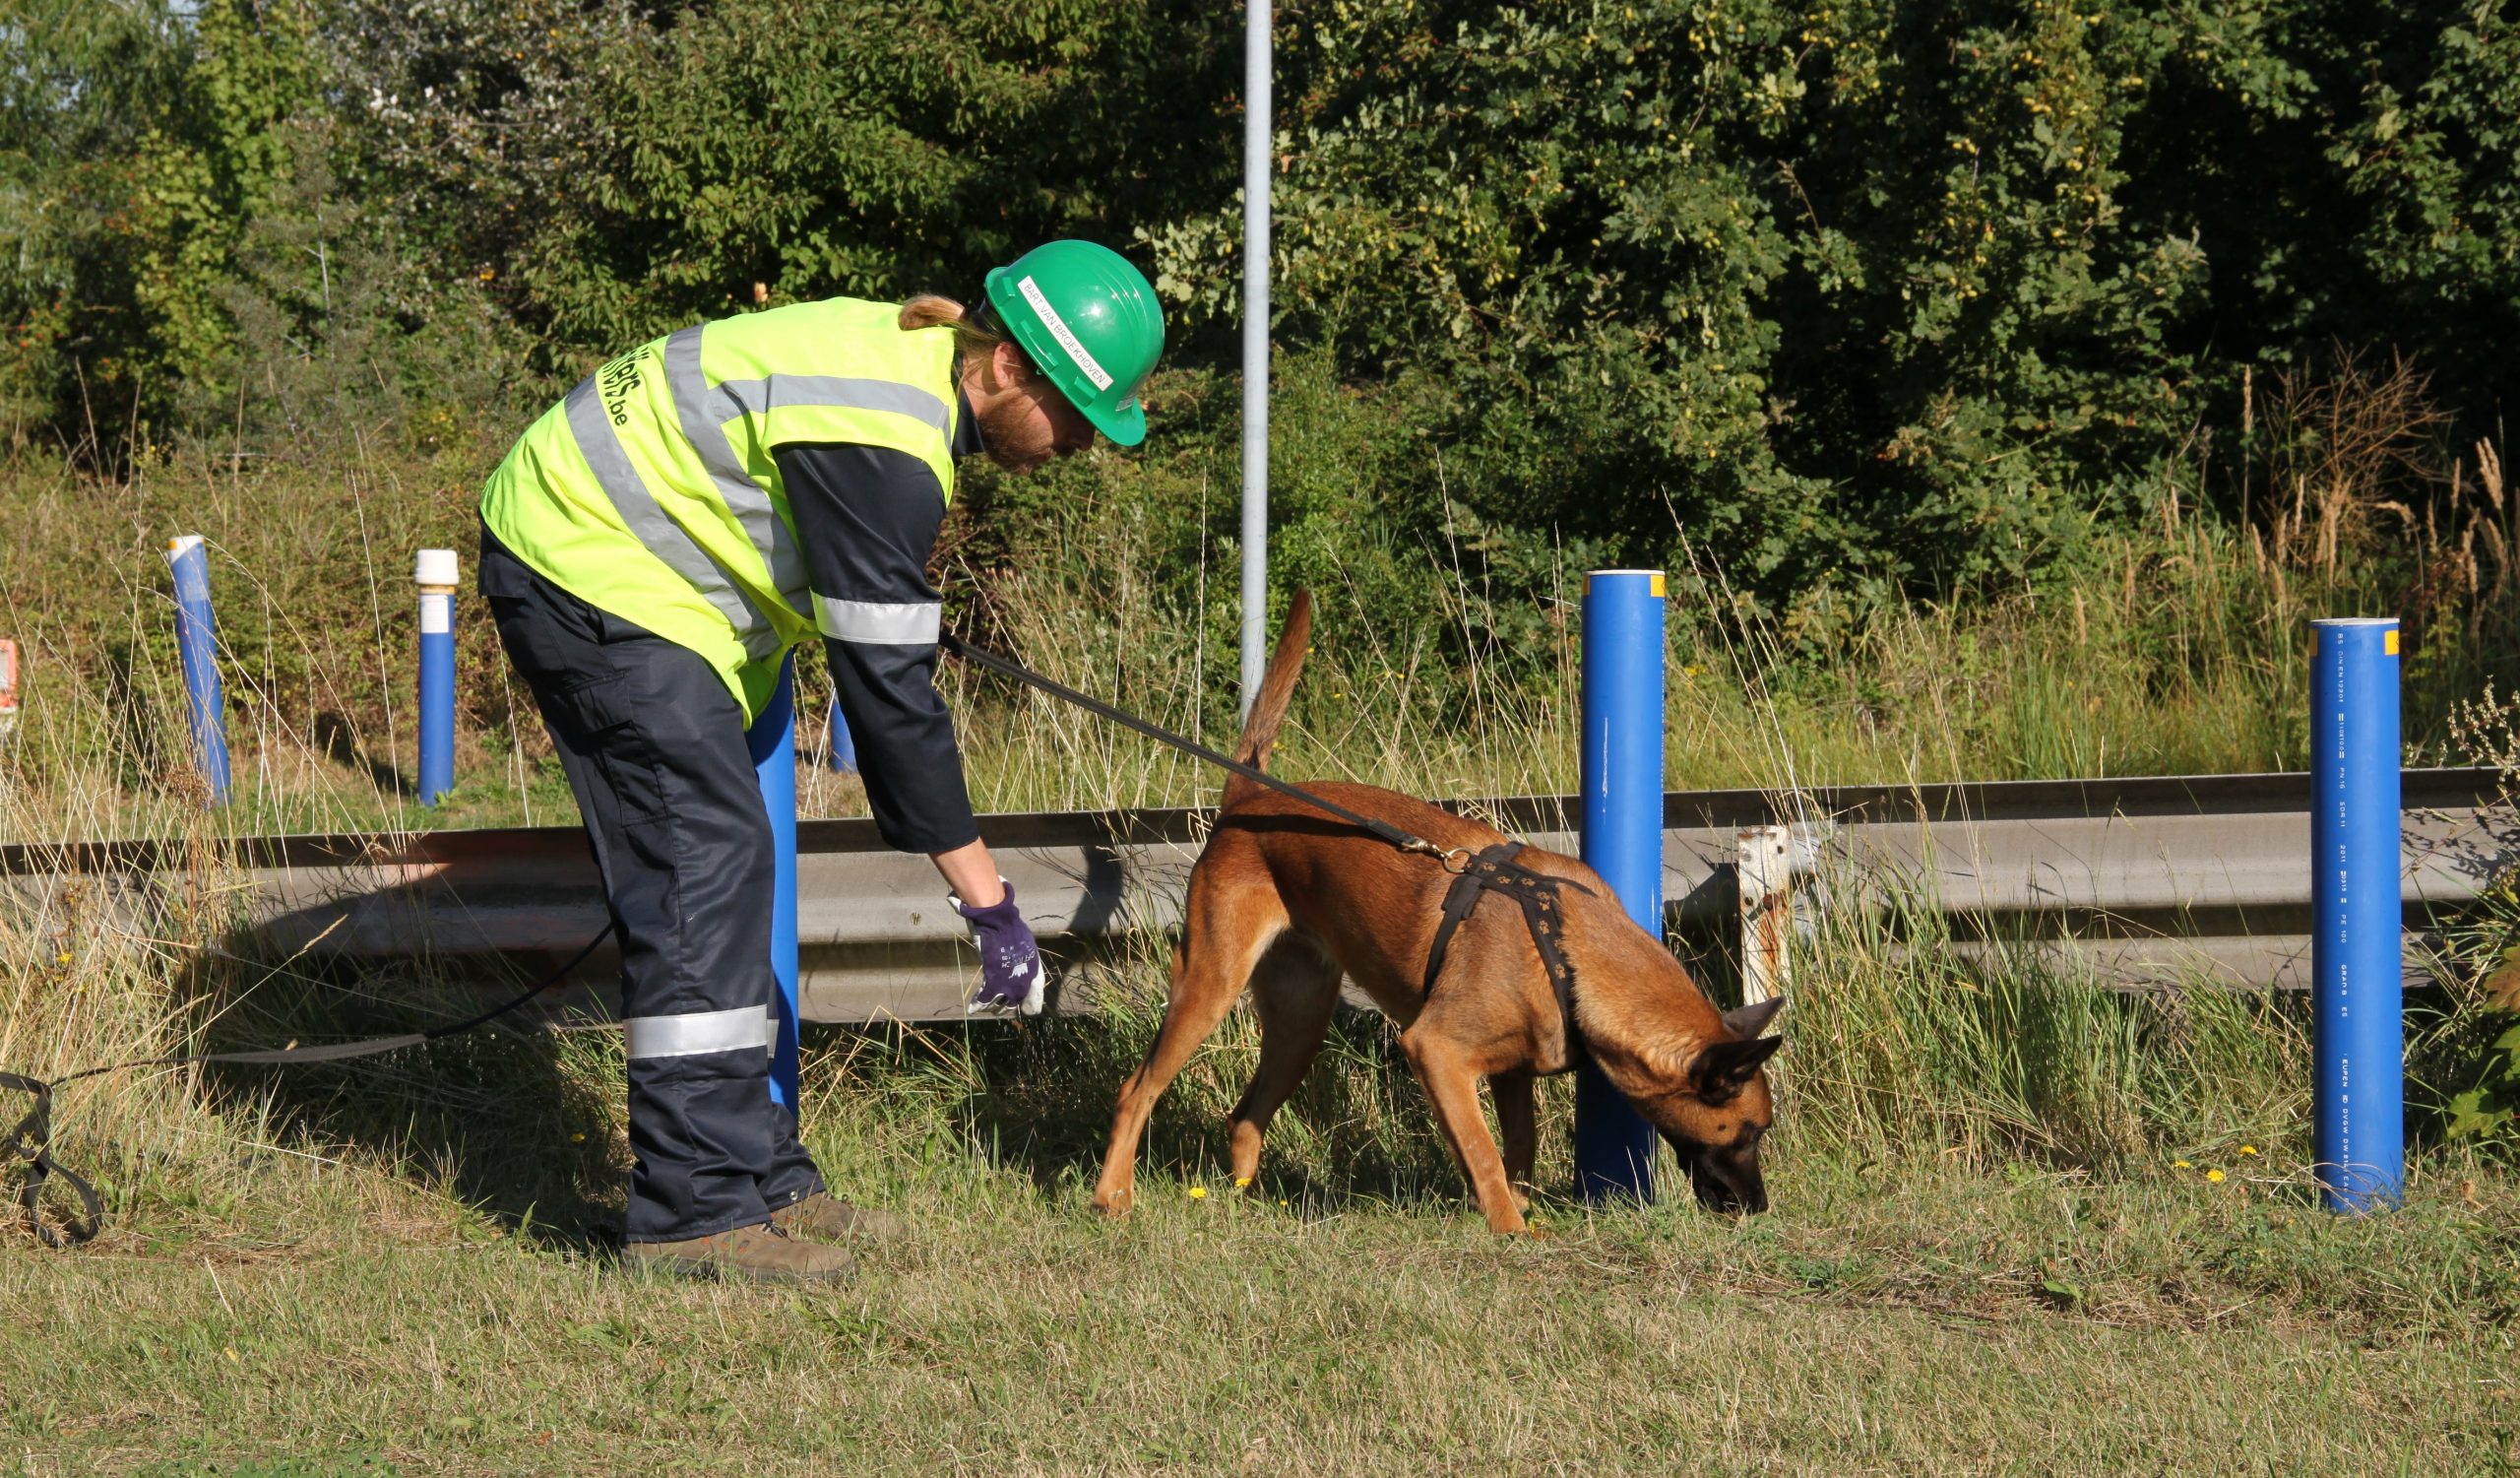 Methane leak detection on buried pipelines with sniffing dogs